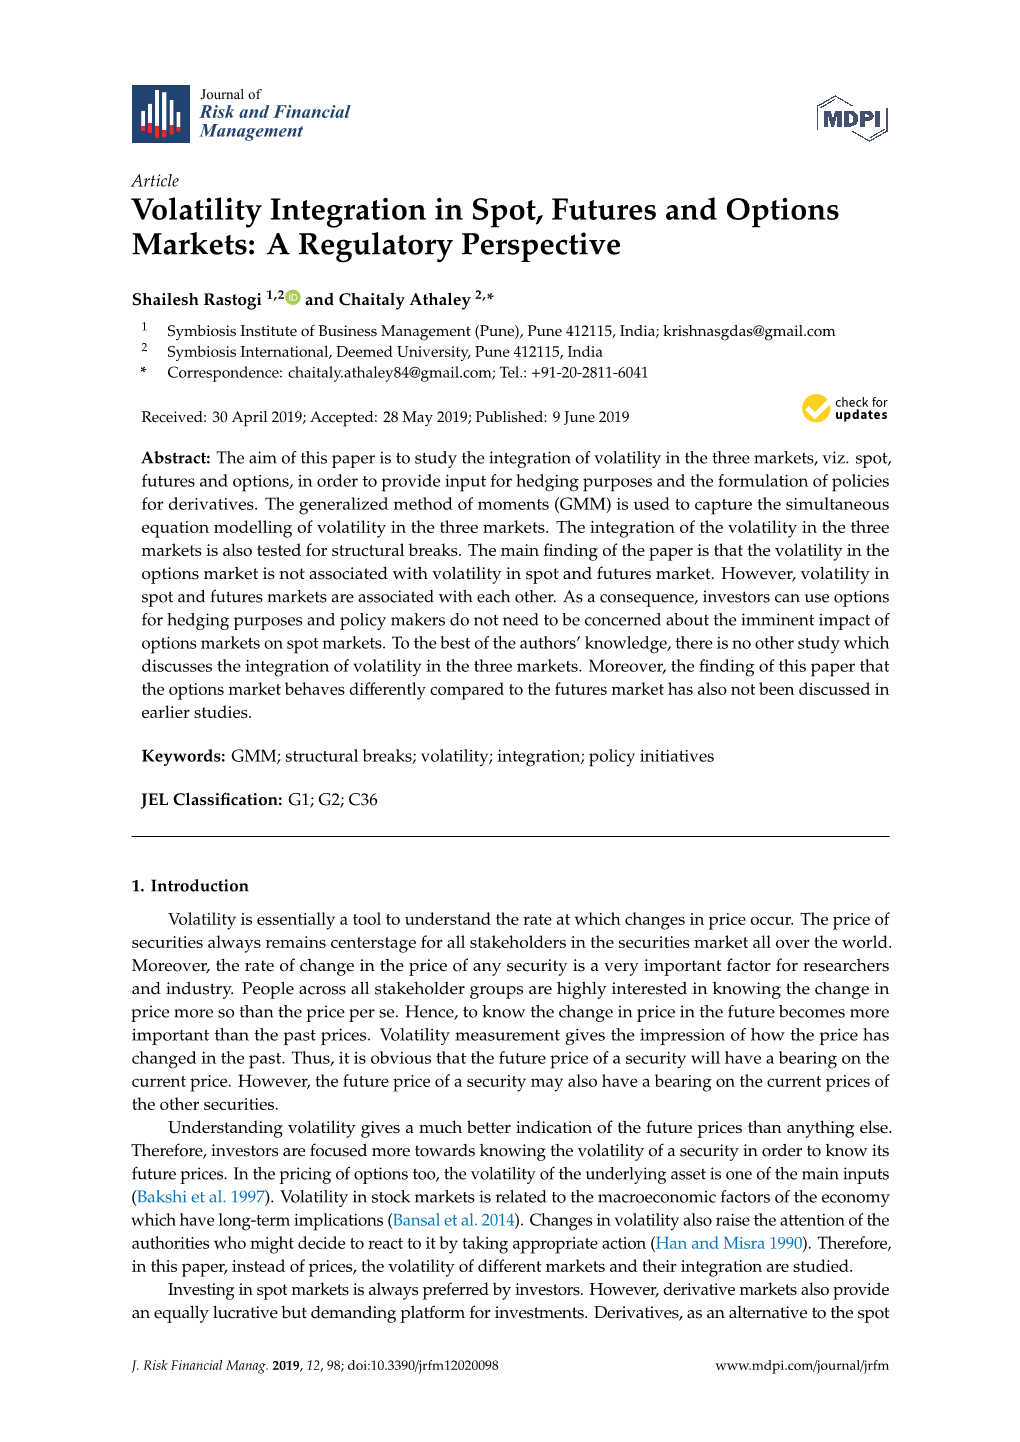 Volatility Integration in Spot, Futures and Options Markets: a Regulatory Perspective